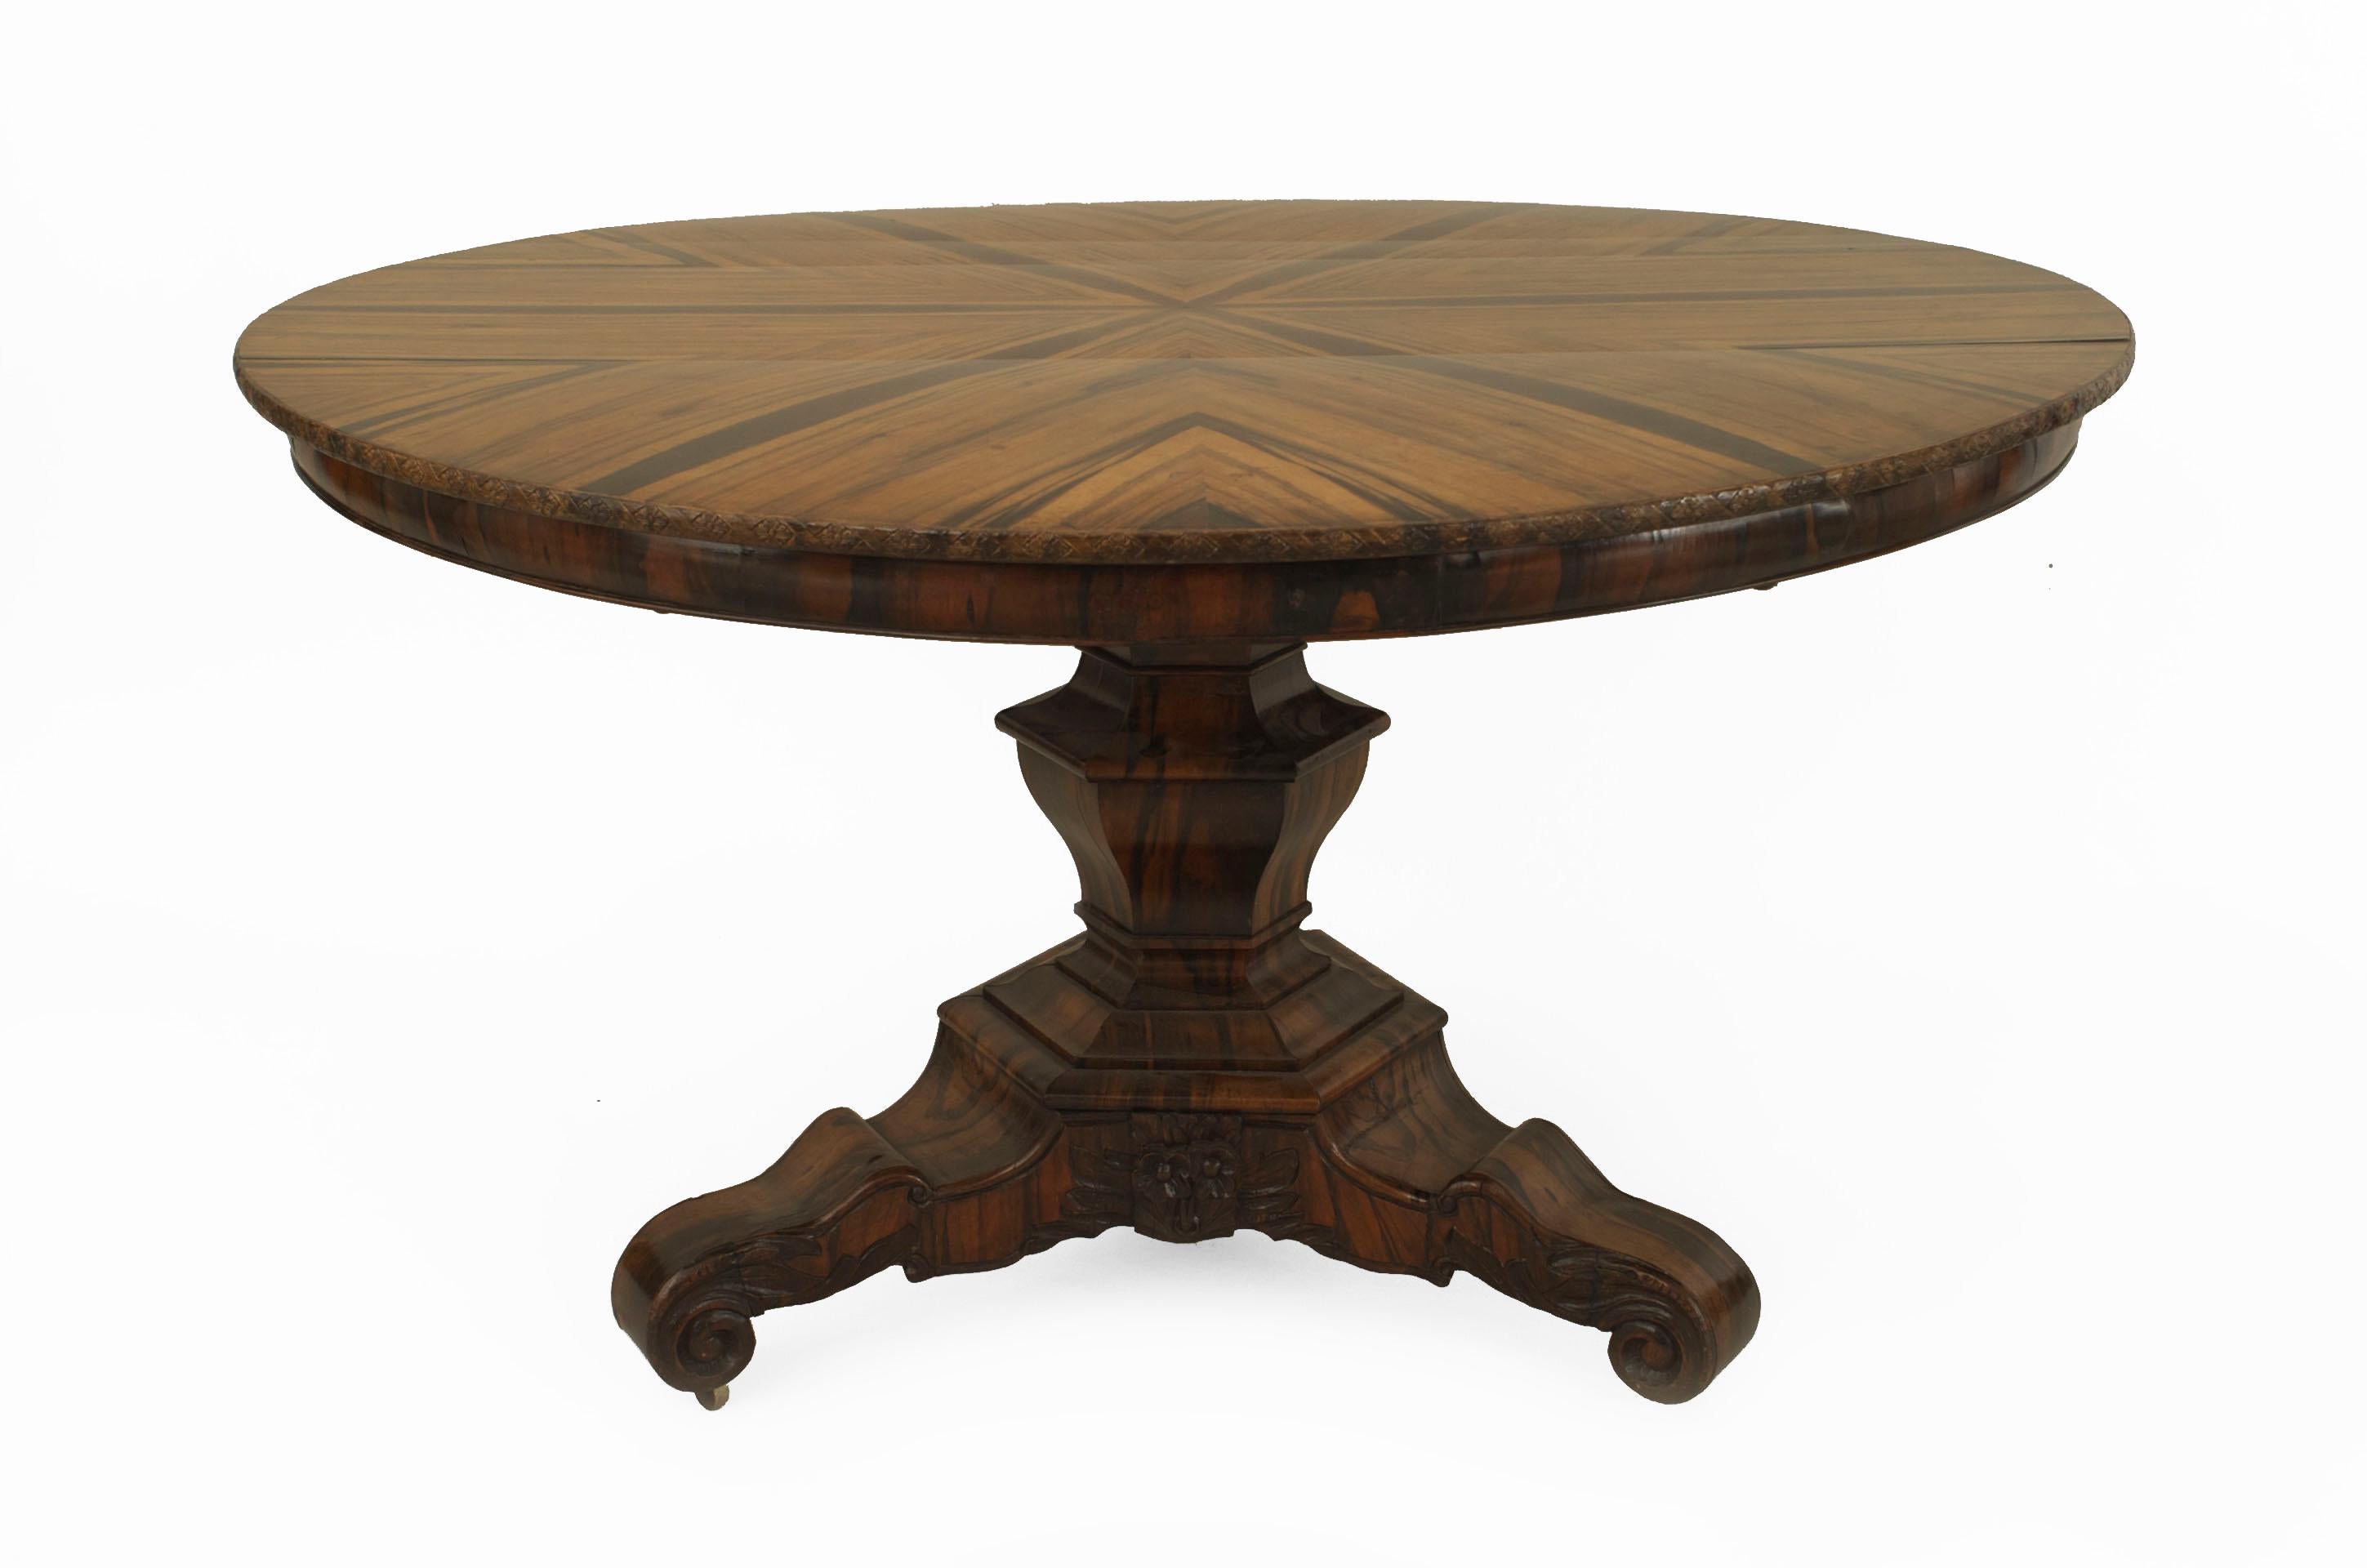 English William IV (possibly Anglo-Indian, circa 1835) zebra wood center table with a book matched & radially veneered top over shaped 6 sided pedestal and triangular platform base.